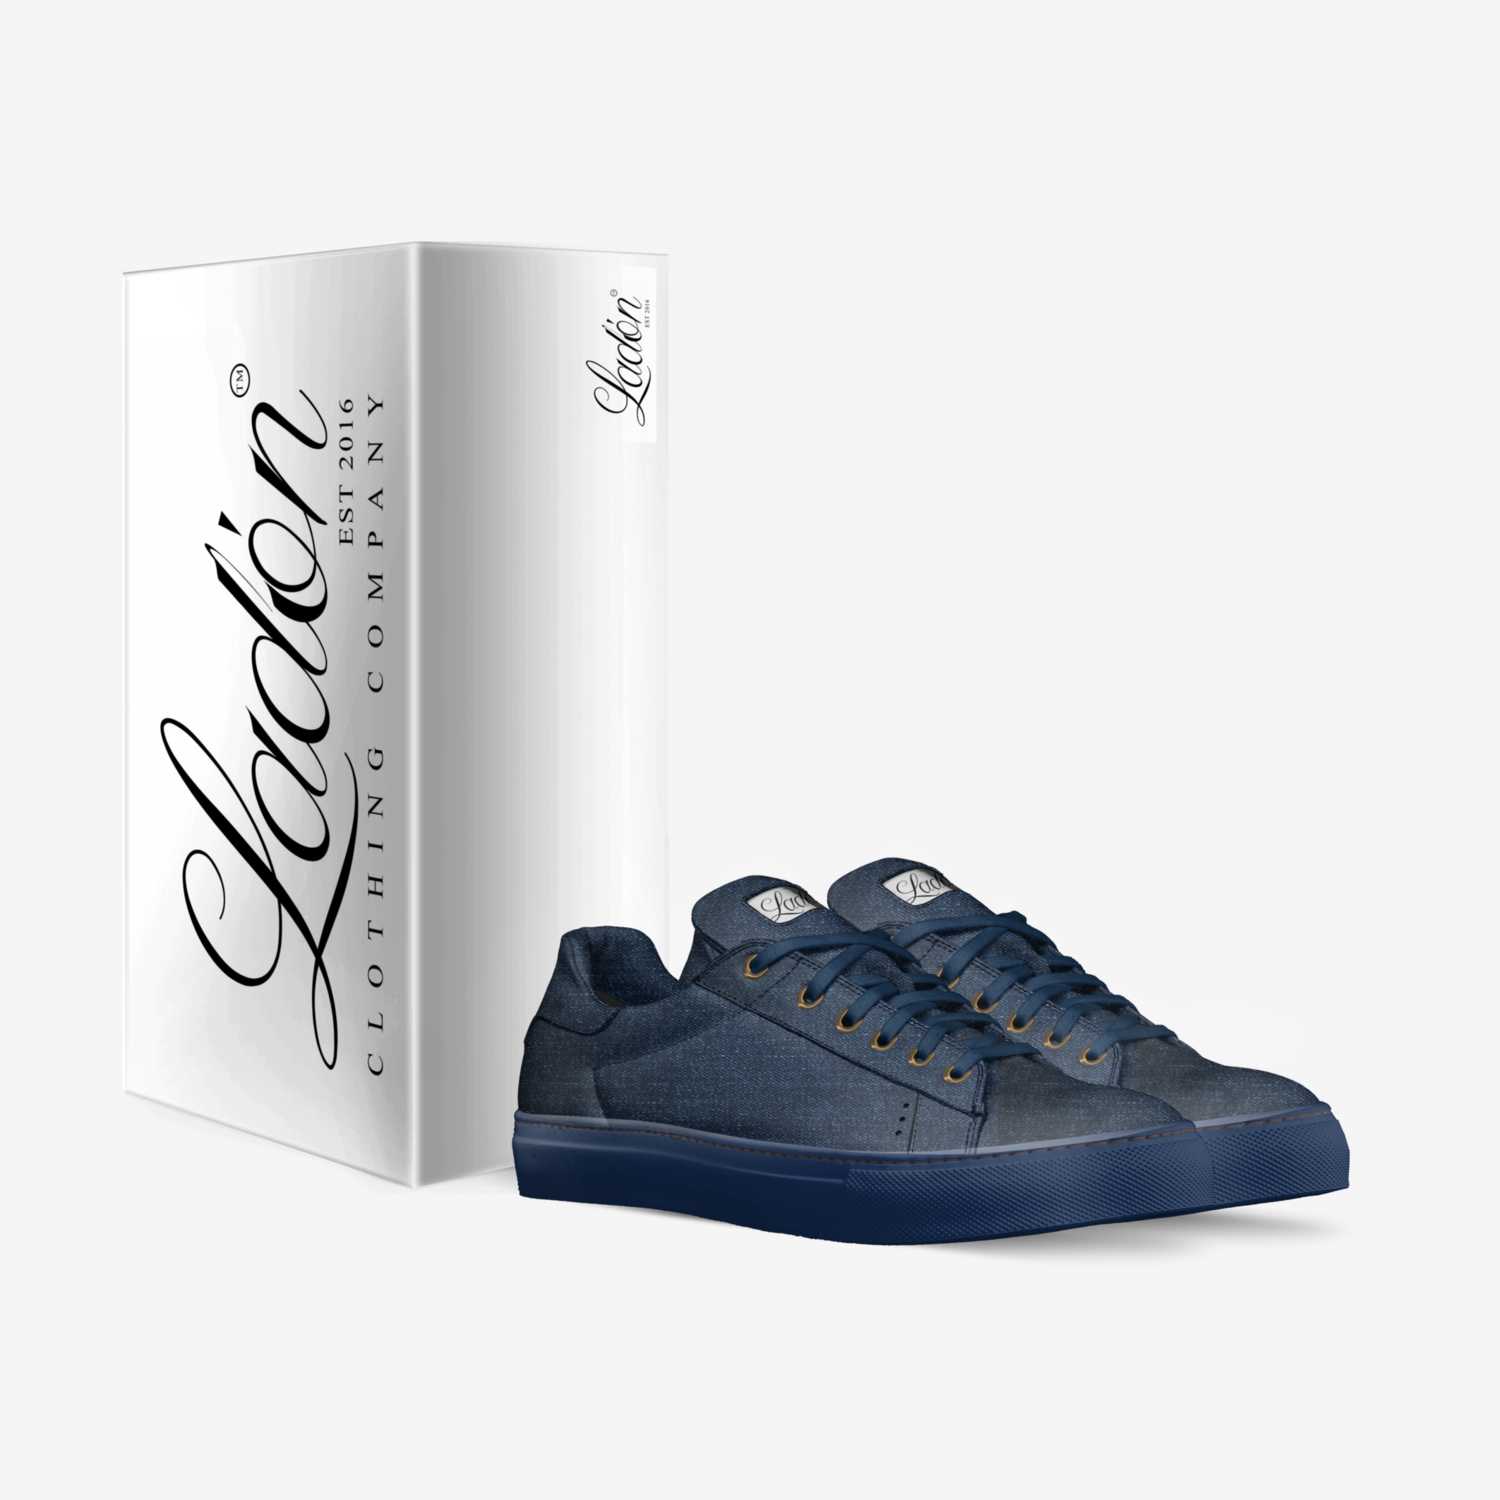 X1 custom made in Italy shoes by Ladón Clothing Company | Box view